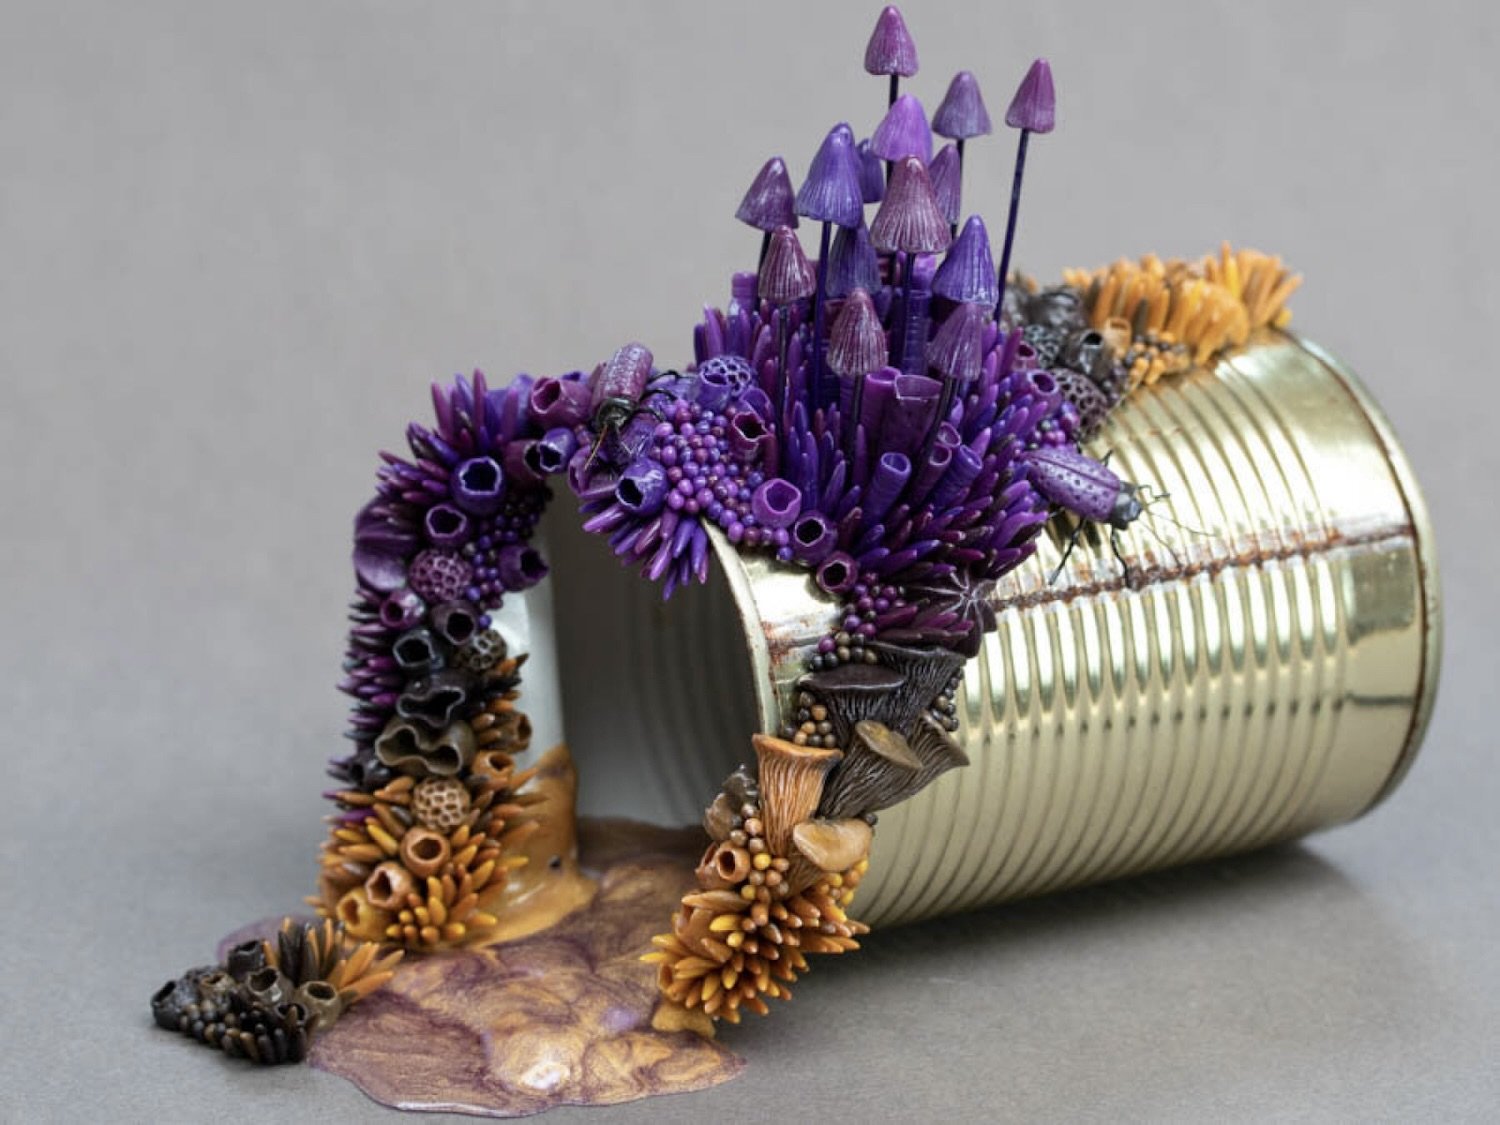 Sculpture: A tin can rests on its side, from the tin can spills toxic waste, while purple and orange fungi grow around it.